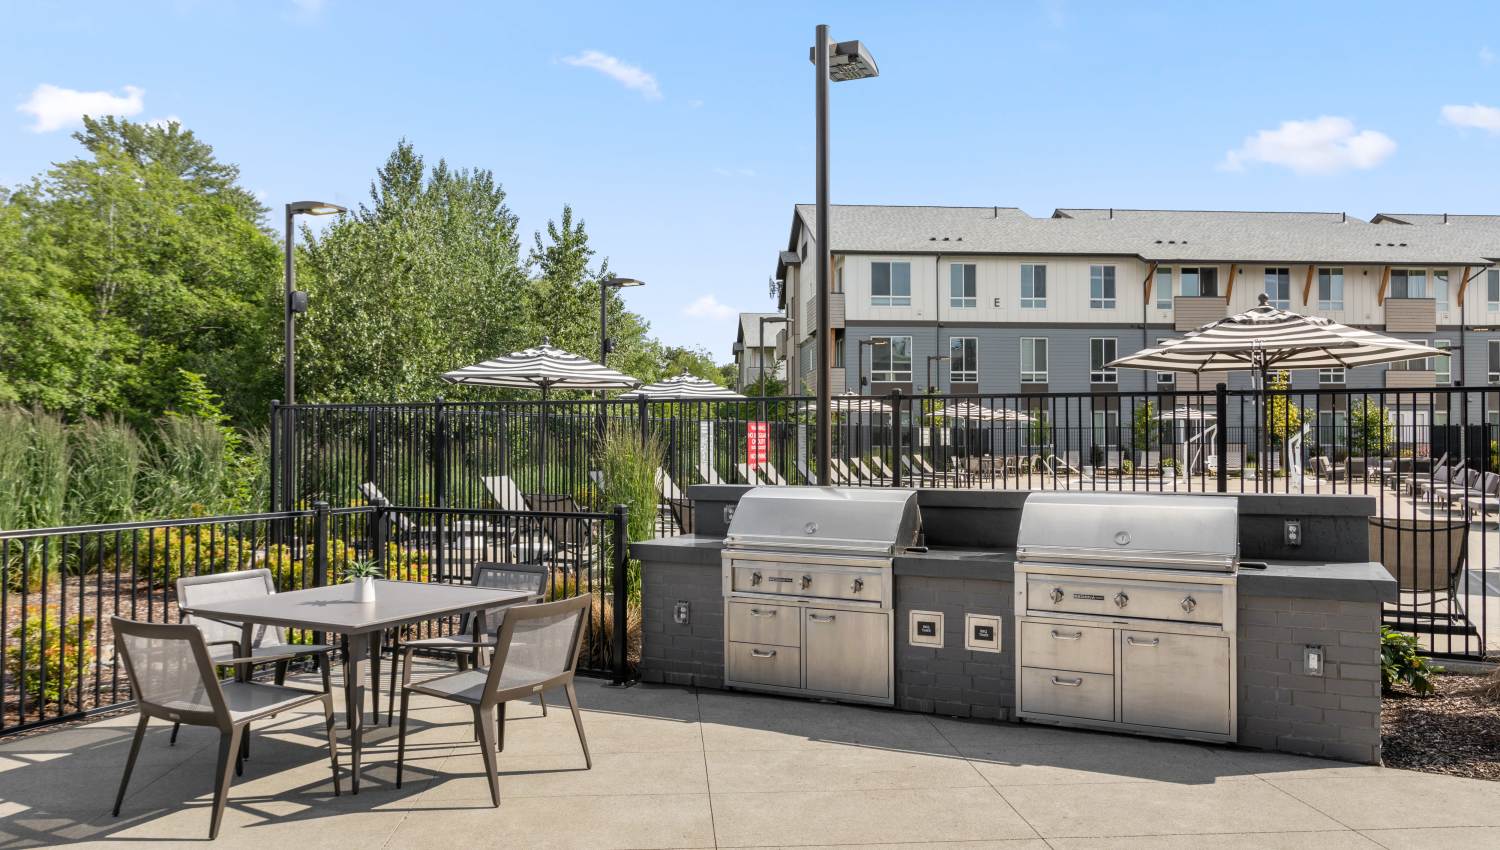 Grilling stations and picnic tables at 207 East in Edgewood, Washington